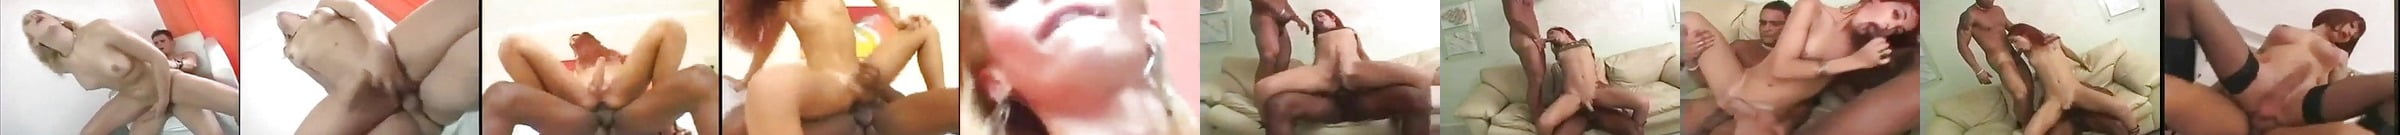 Hard Cock Trannies Riding Cock Compilation Tranny Hd Porn Xhamster